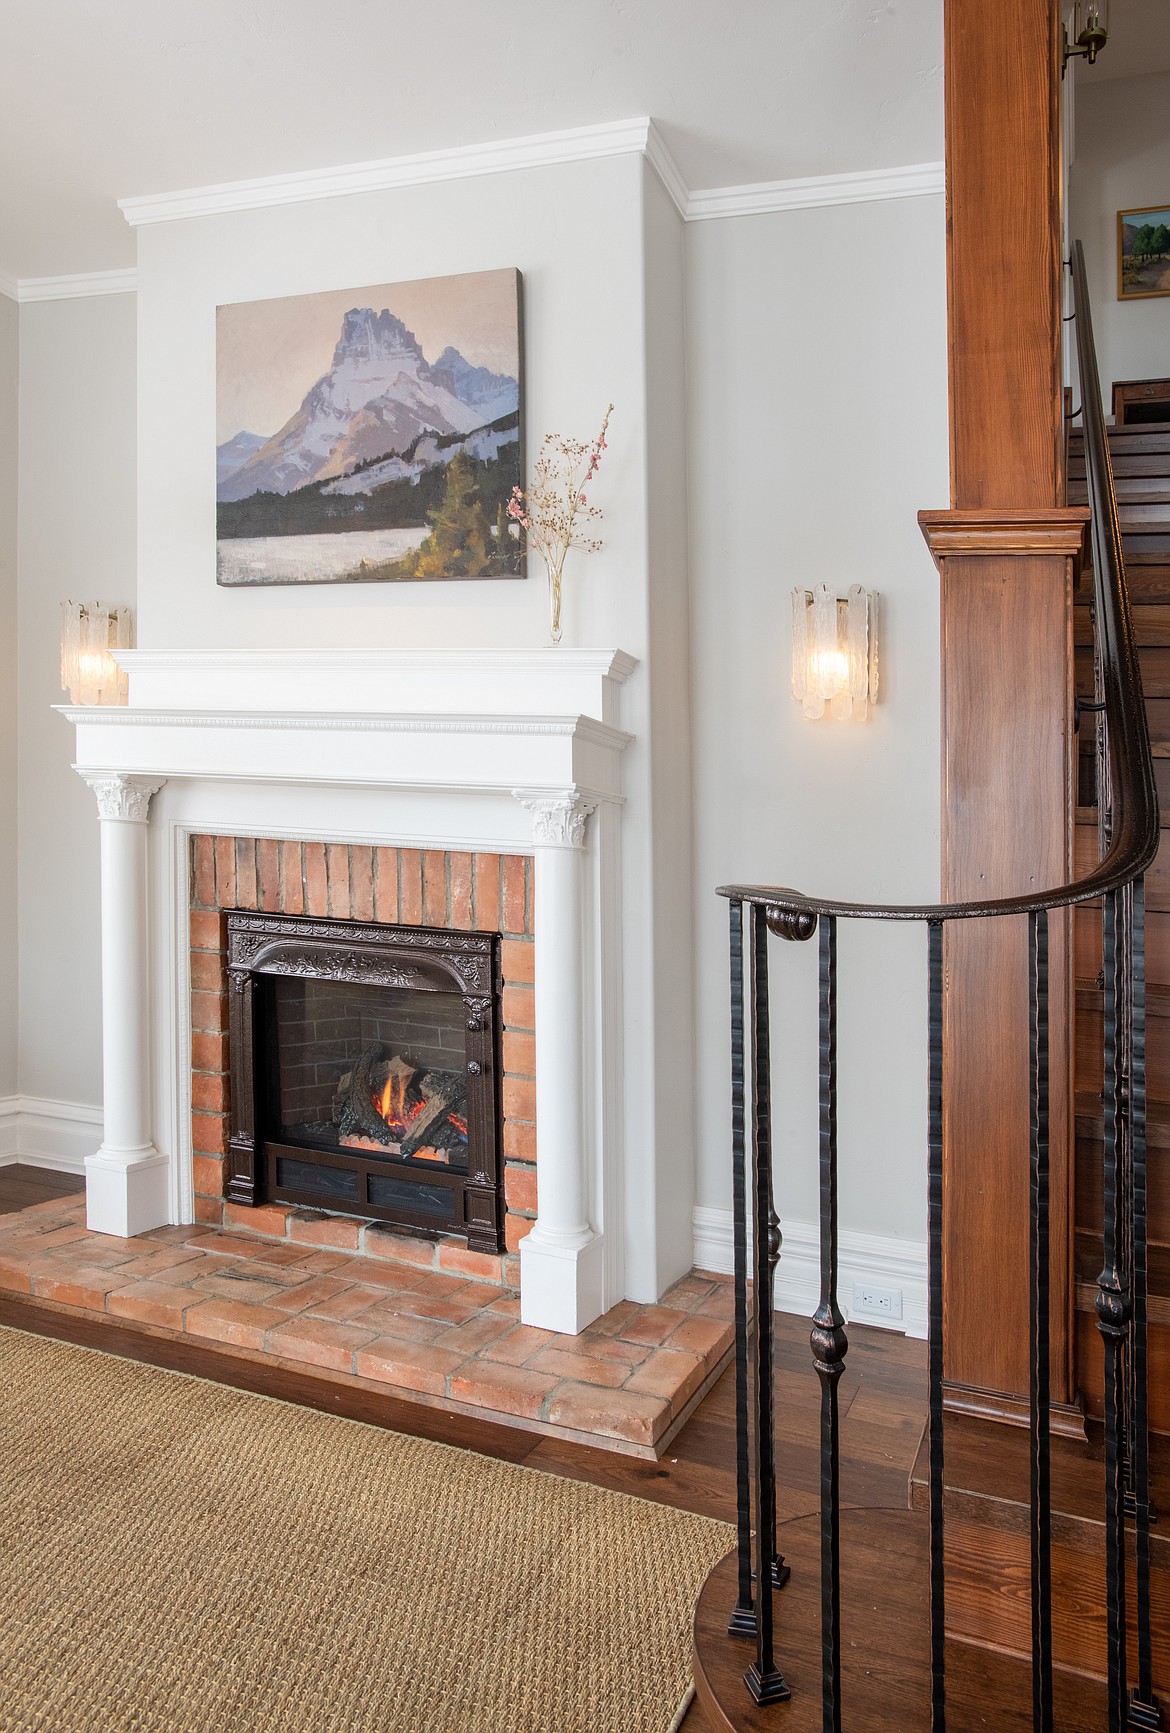 The metal and bricks from the original fireplace in the home were saved to be reused in the new fireplace in the sitting room of the Houston Home on Central Avenue in Whitefish. (Photo courtesy of Jessica Vizzutti of Cou Cou Studio)